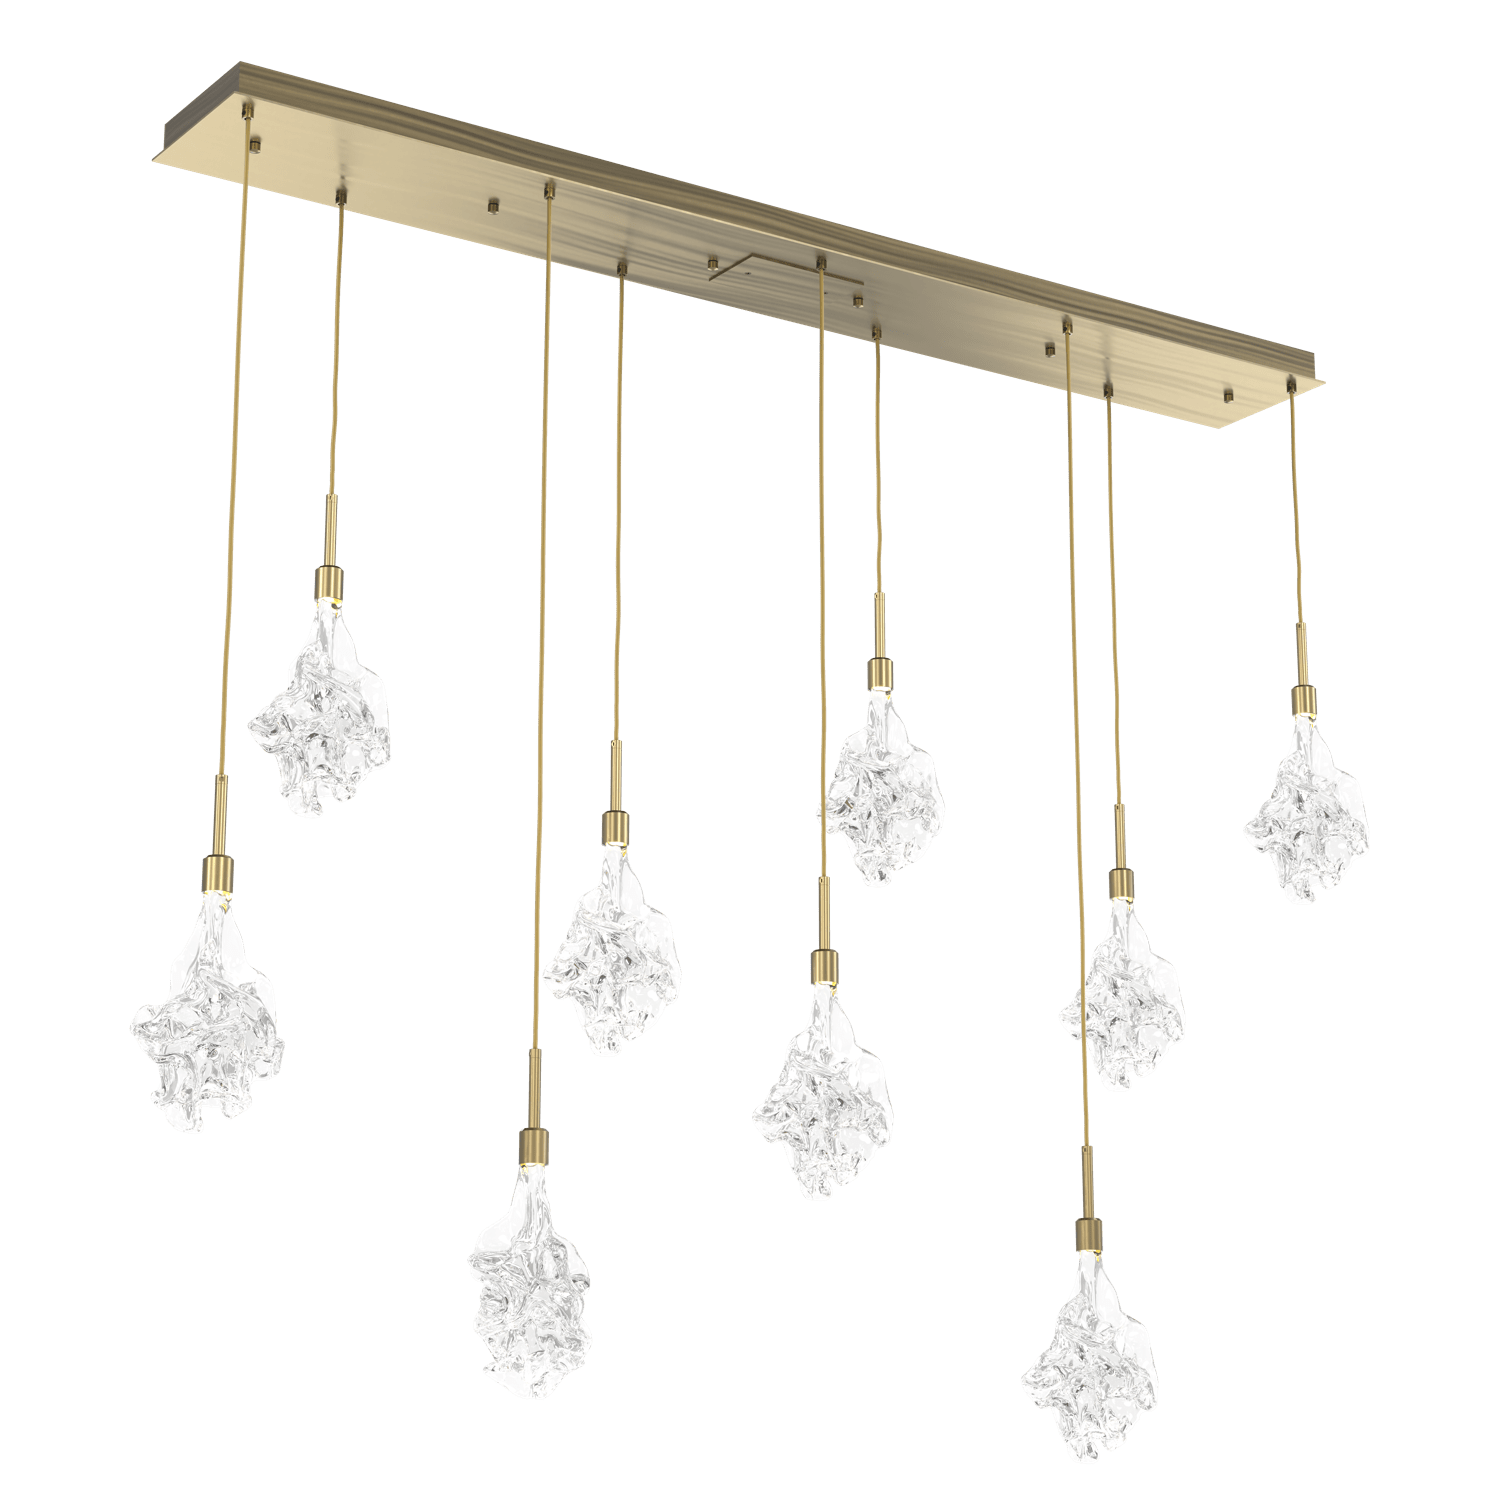 PLB0059-09-HB-Hammerton-Studio-Blossom-9-light-linear-pendant-chandelier-with-heritage-brass-finish-and-clear-handblown-crystal-glass-shades-and-LED-lamping